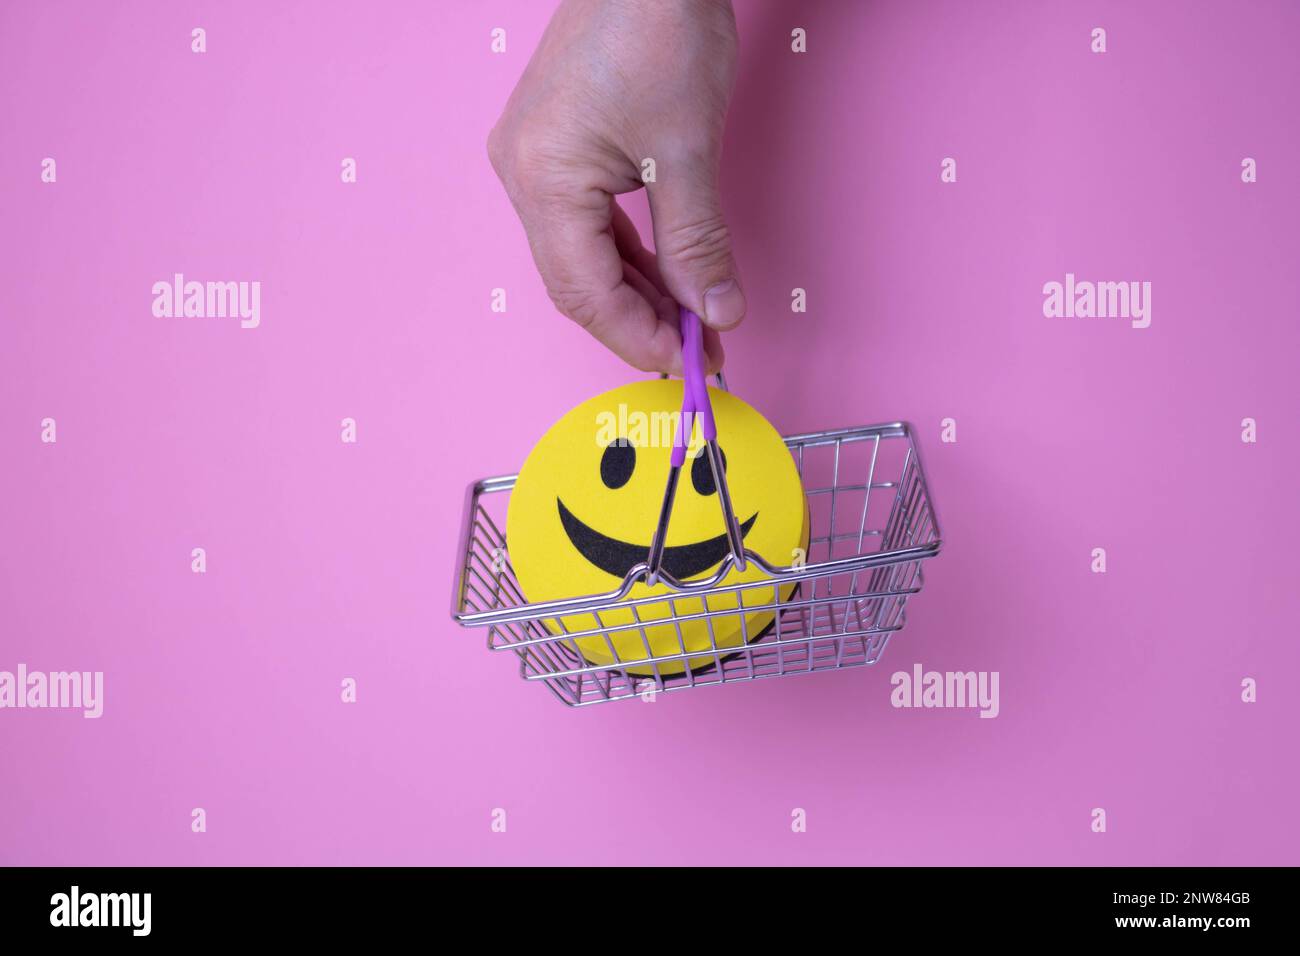 The hand holds a basket with a yellow smiling smiley face on a pink background. Stock Photo